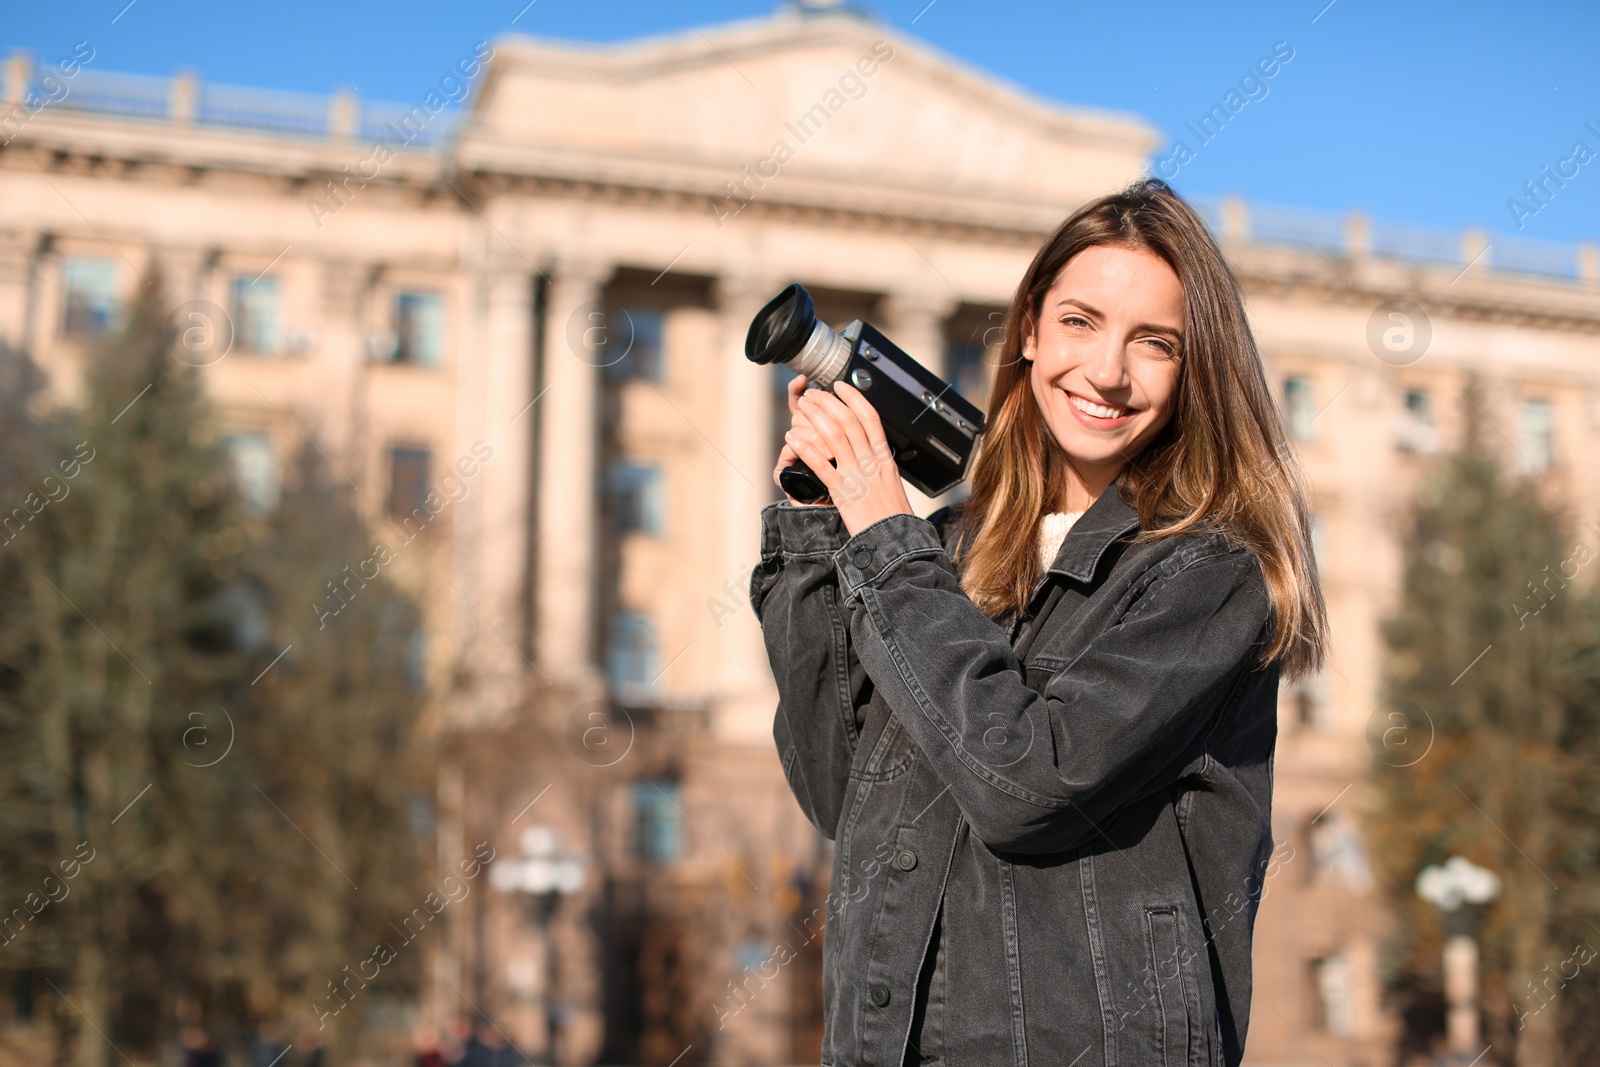 Photo of Beautiful young woman with vintage video camera on city street